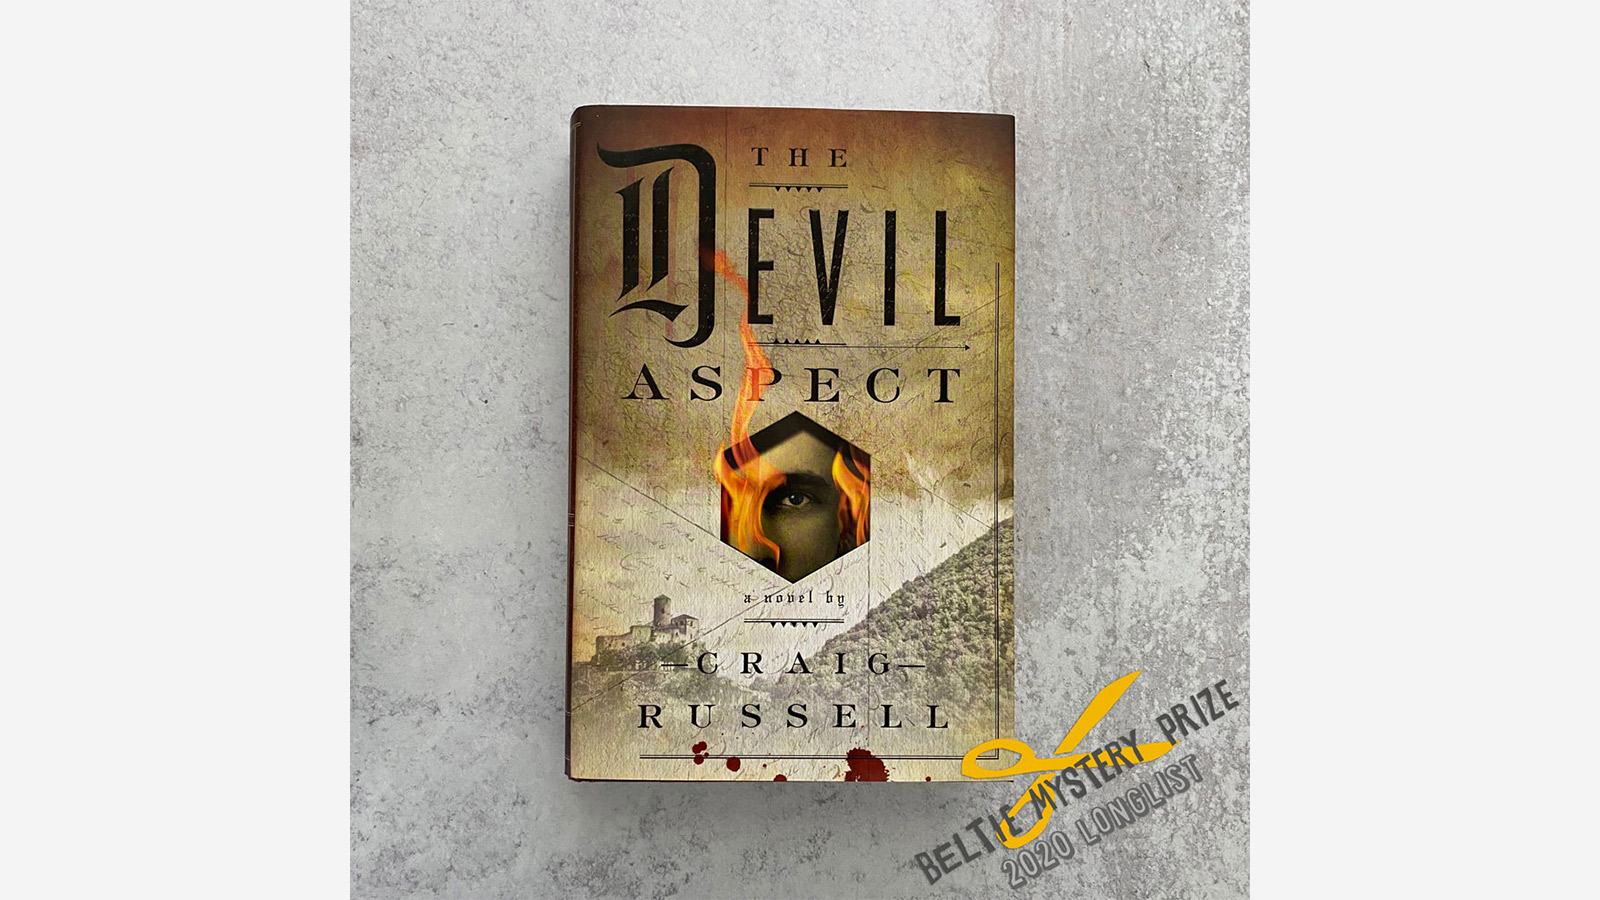 The Devil Aspect by Craig Russell